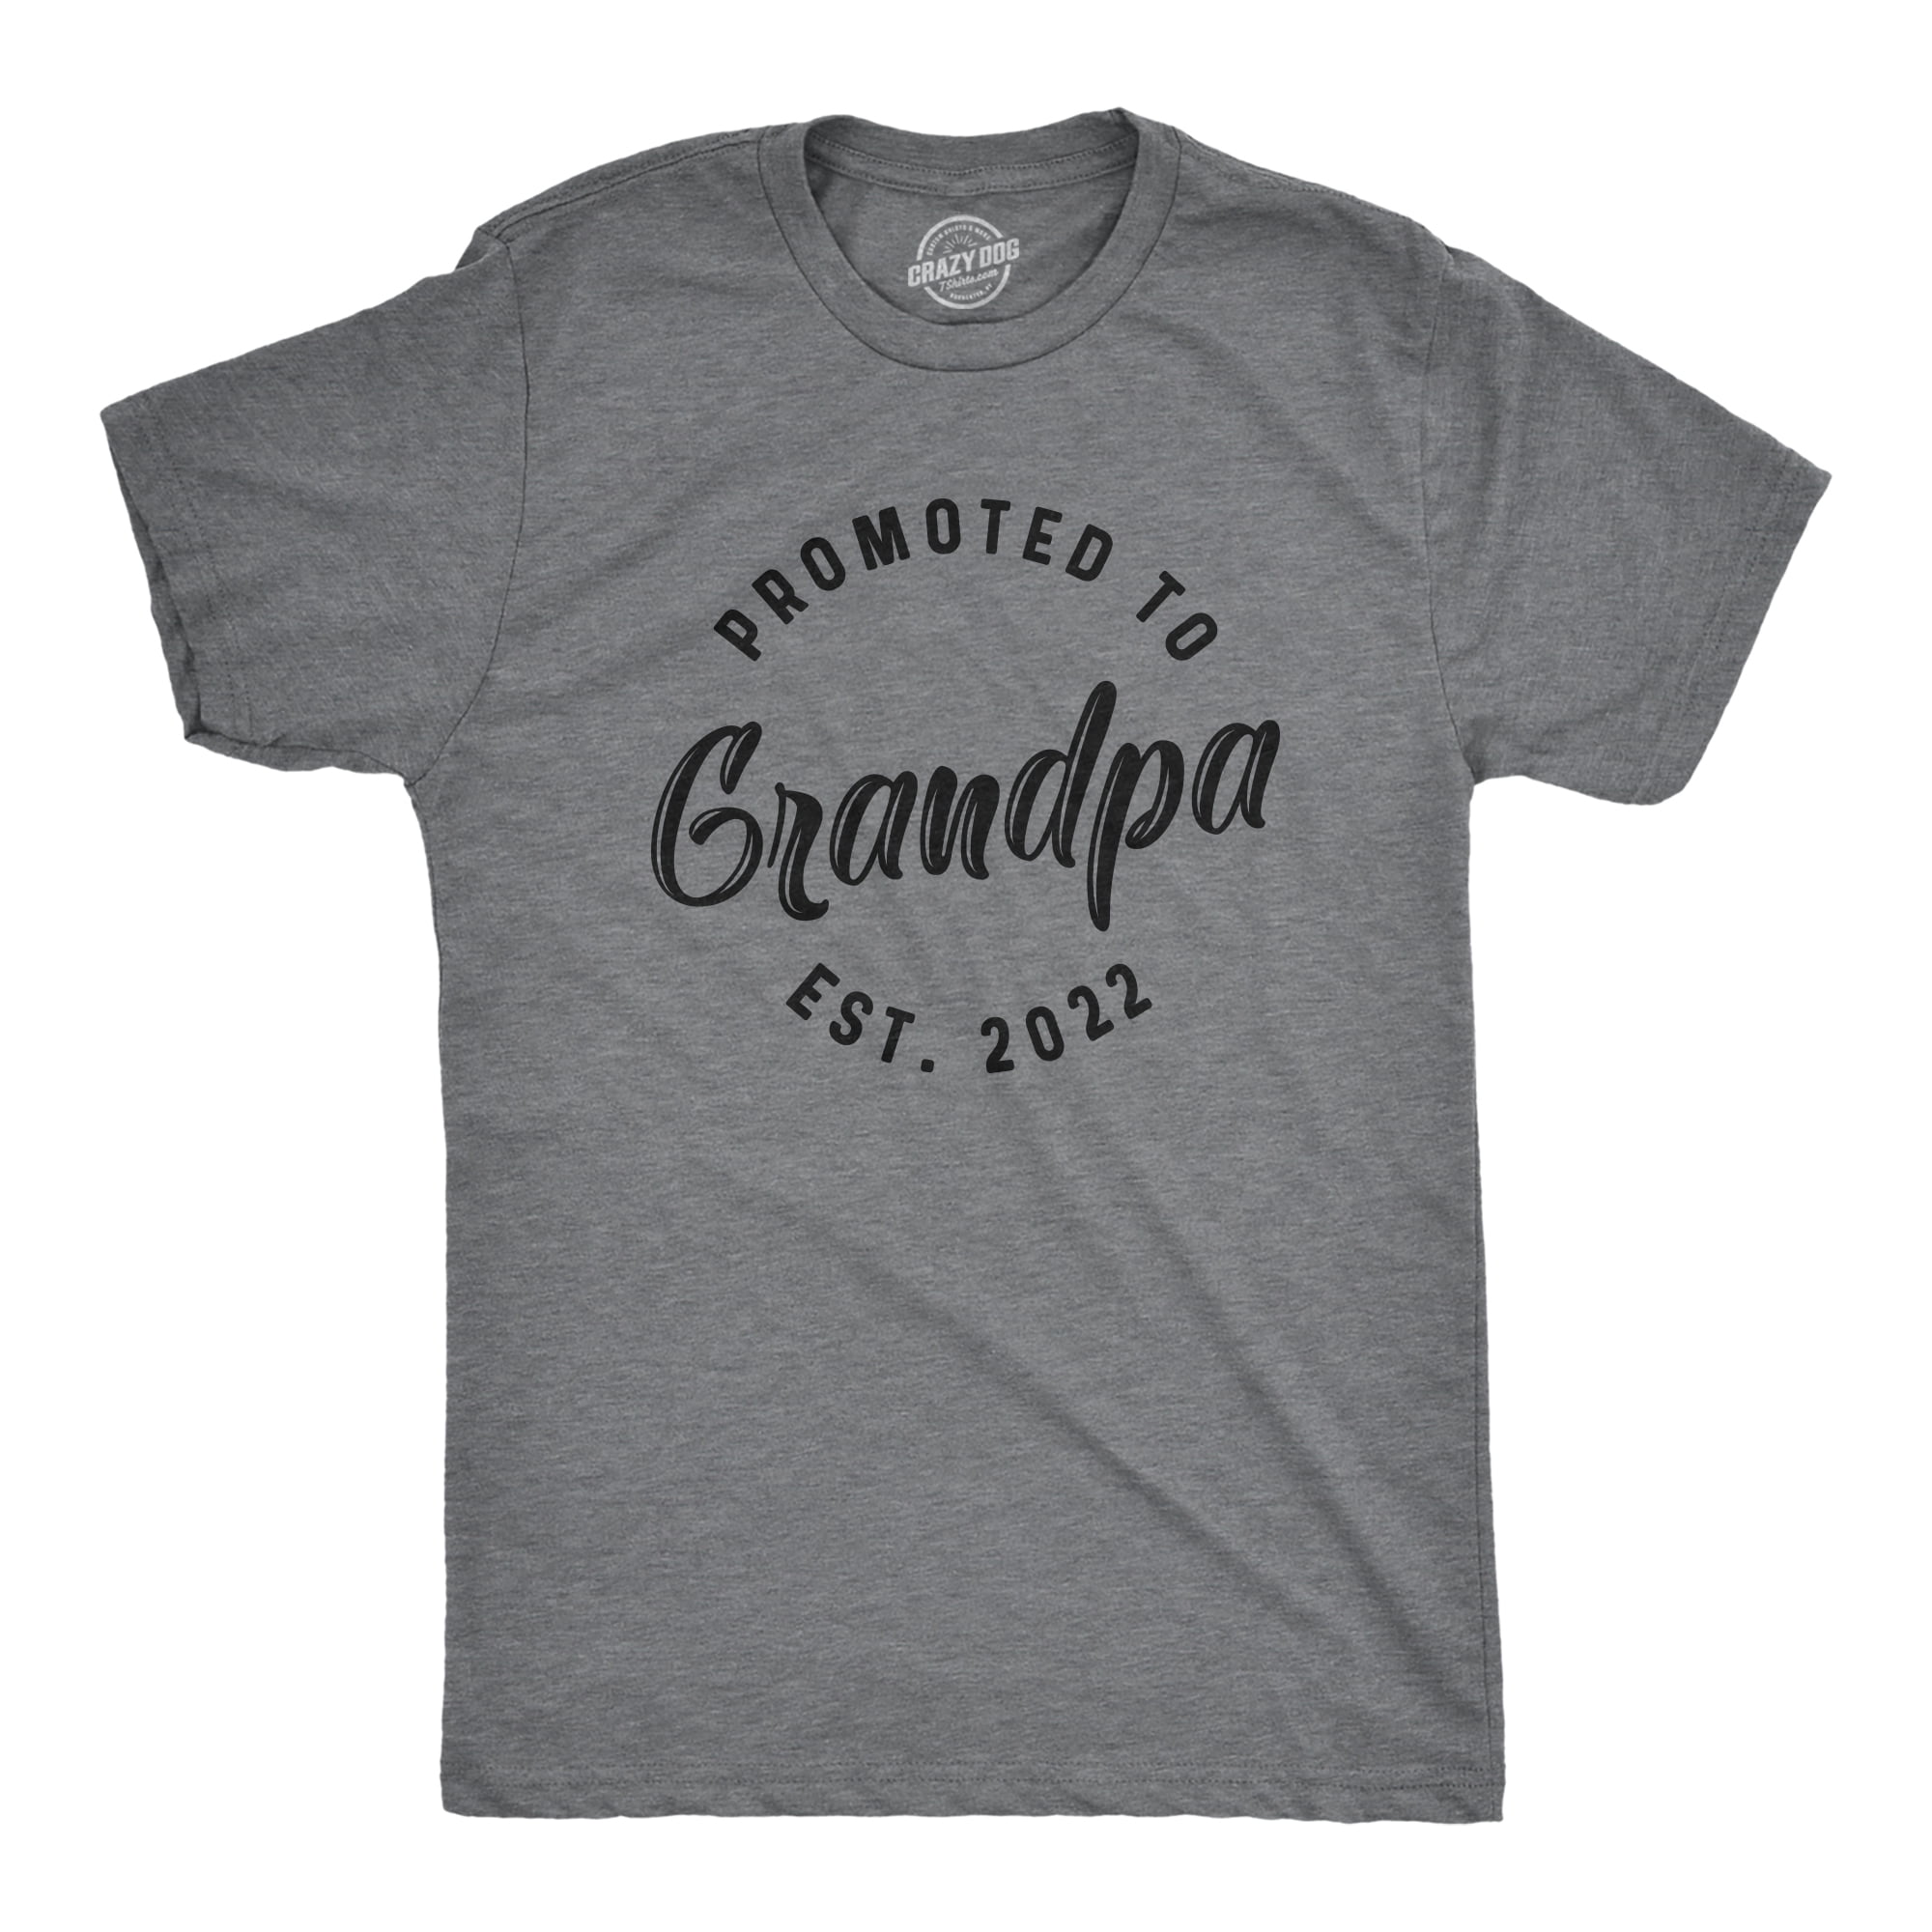 Promoted To Pappy 2021 Vintage T-Shirt New Grandpa Retro Classic Men tshirt First Time Grandpa Father's Day Gift Idea